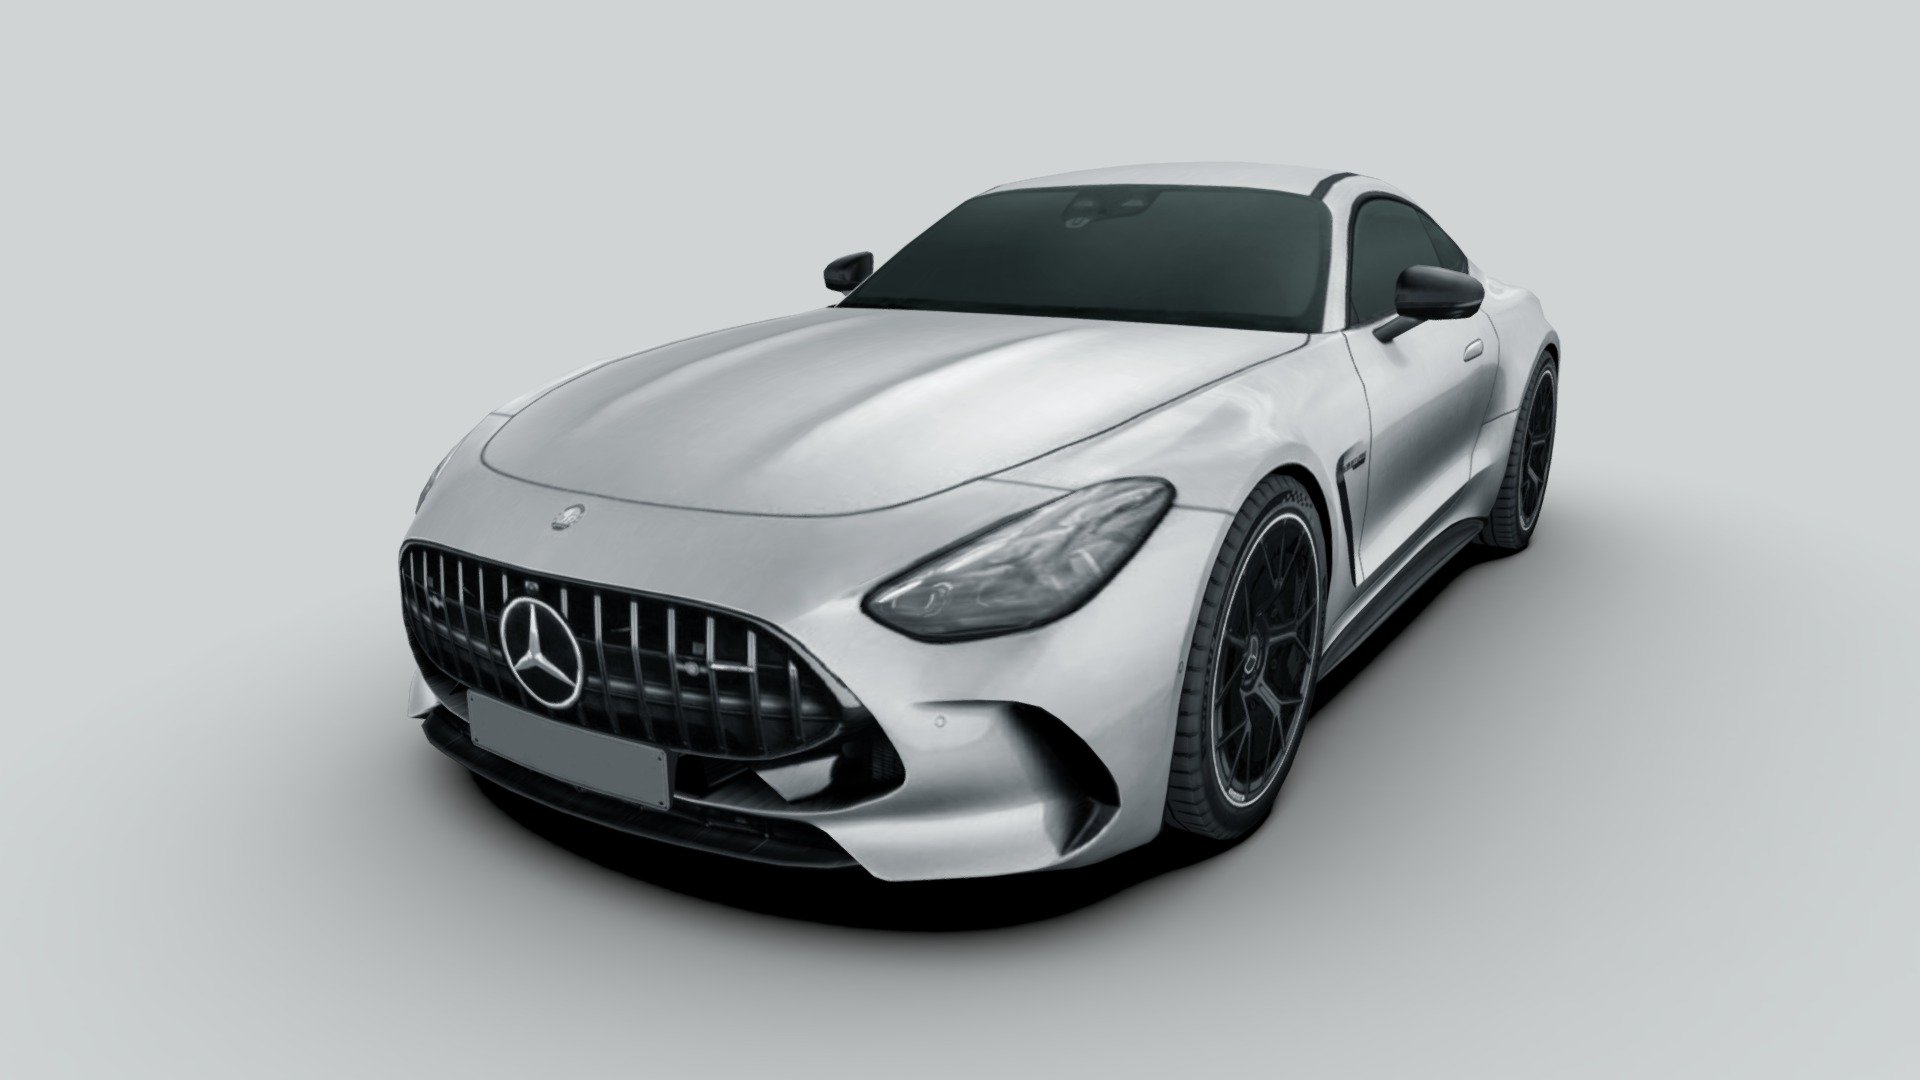 3d model of the 2024 Mercedes-Benz AMG GT, a 2-door liftback coupé sports car.

The model is very low-poly, full-scale, real photos texture (single 2048 x 2048 png).

Package includes 5 file formats and texture (3ds, fbx, dae, obj and skp)

Hope you enjoy it.

José Bronze - Mercedes-Benz AMG GT 2024 - Buy Royalty Free 3D model by Jose Bronze (@pinceladas3d) 3d model